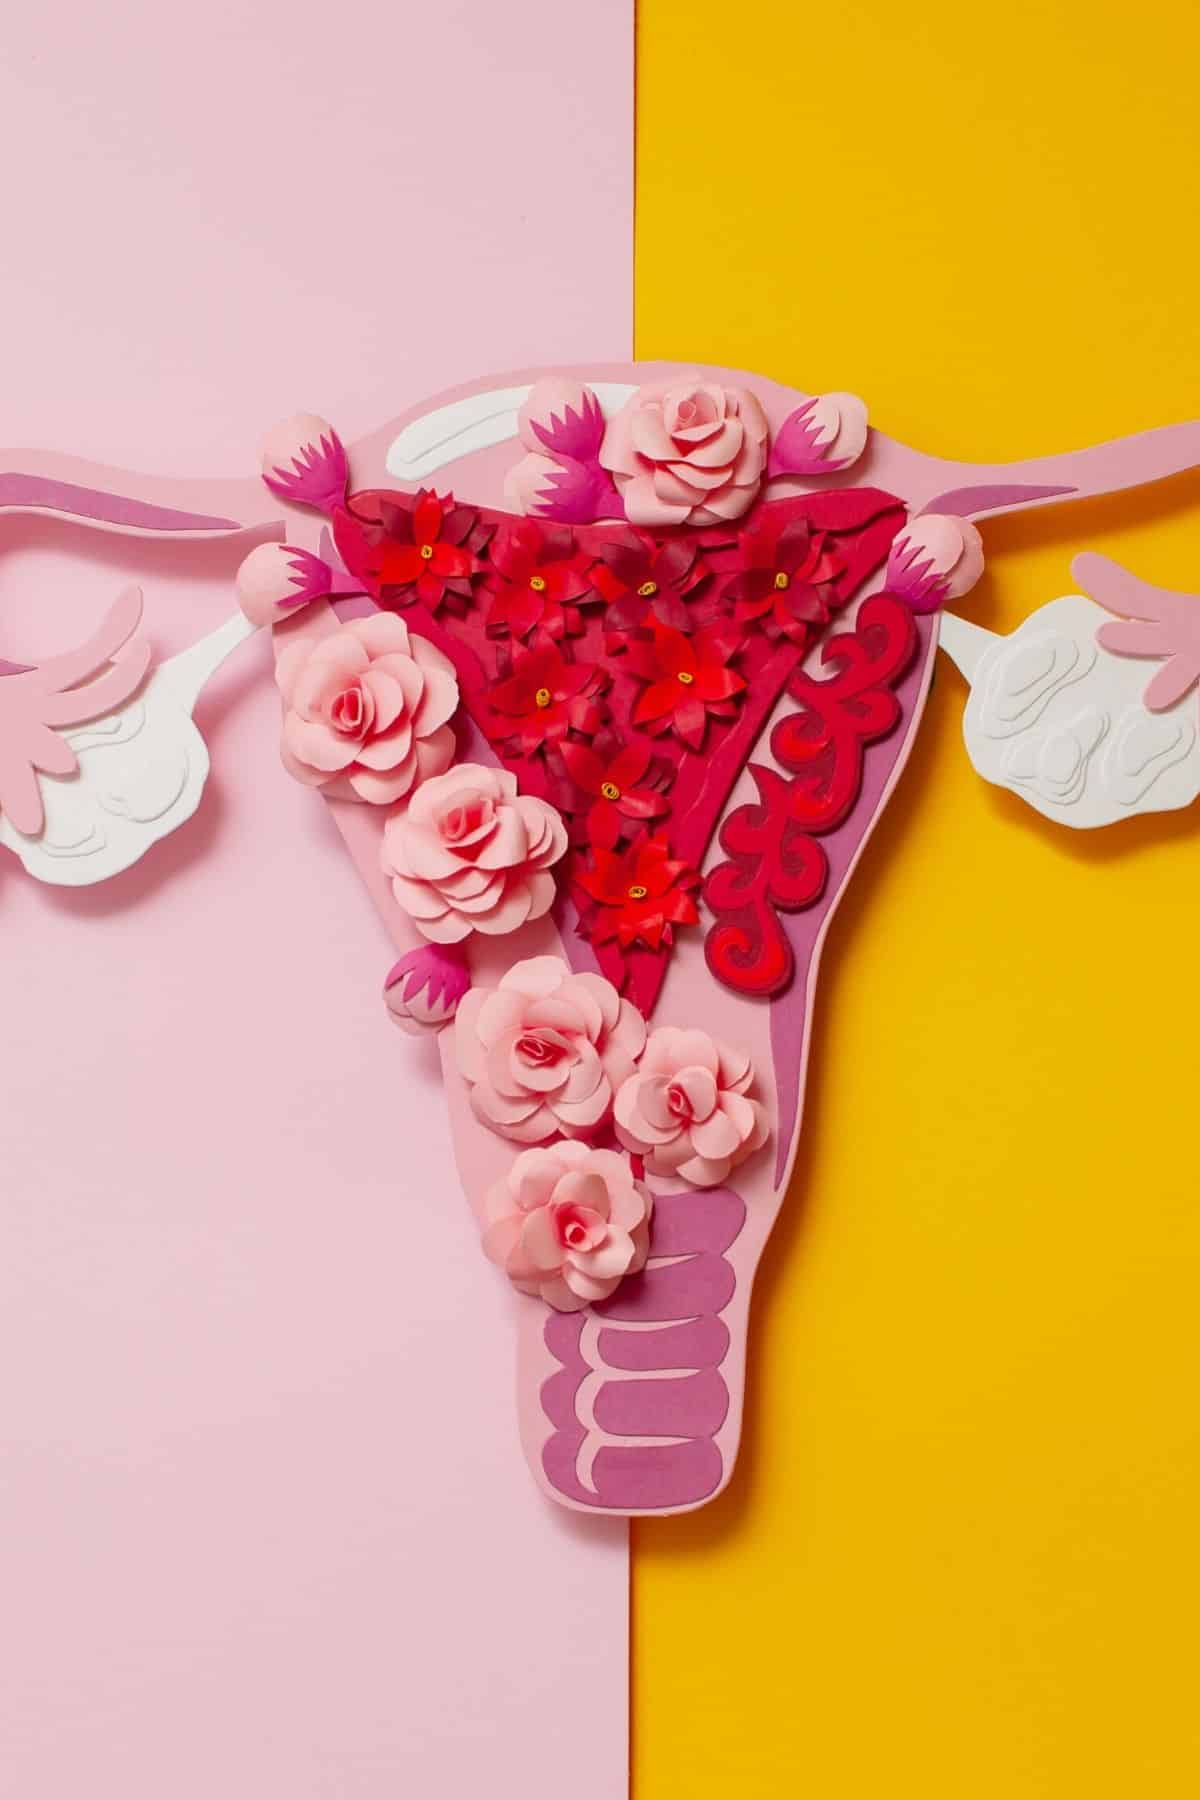 a colorful picture of a uterus made from paper